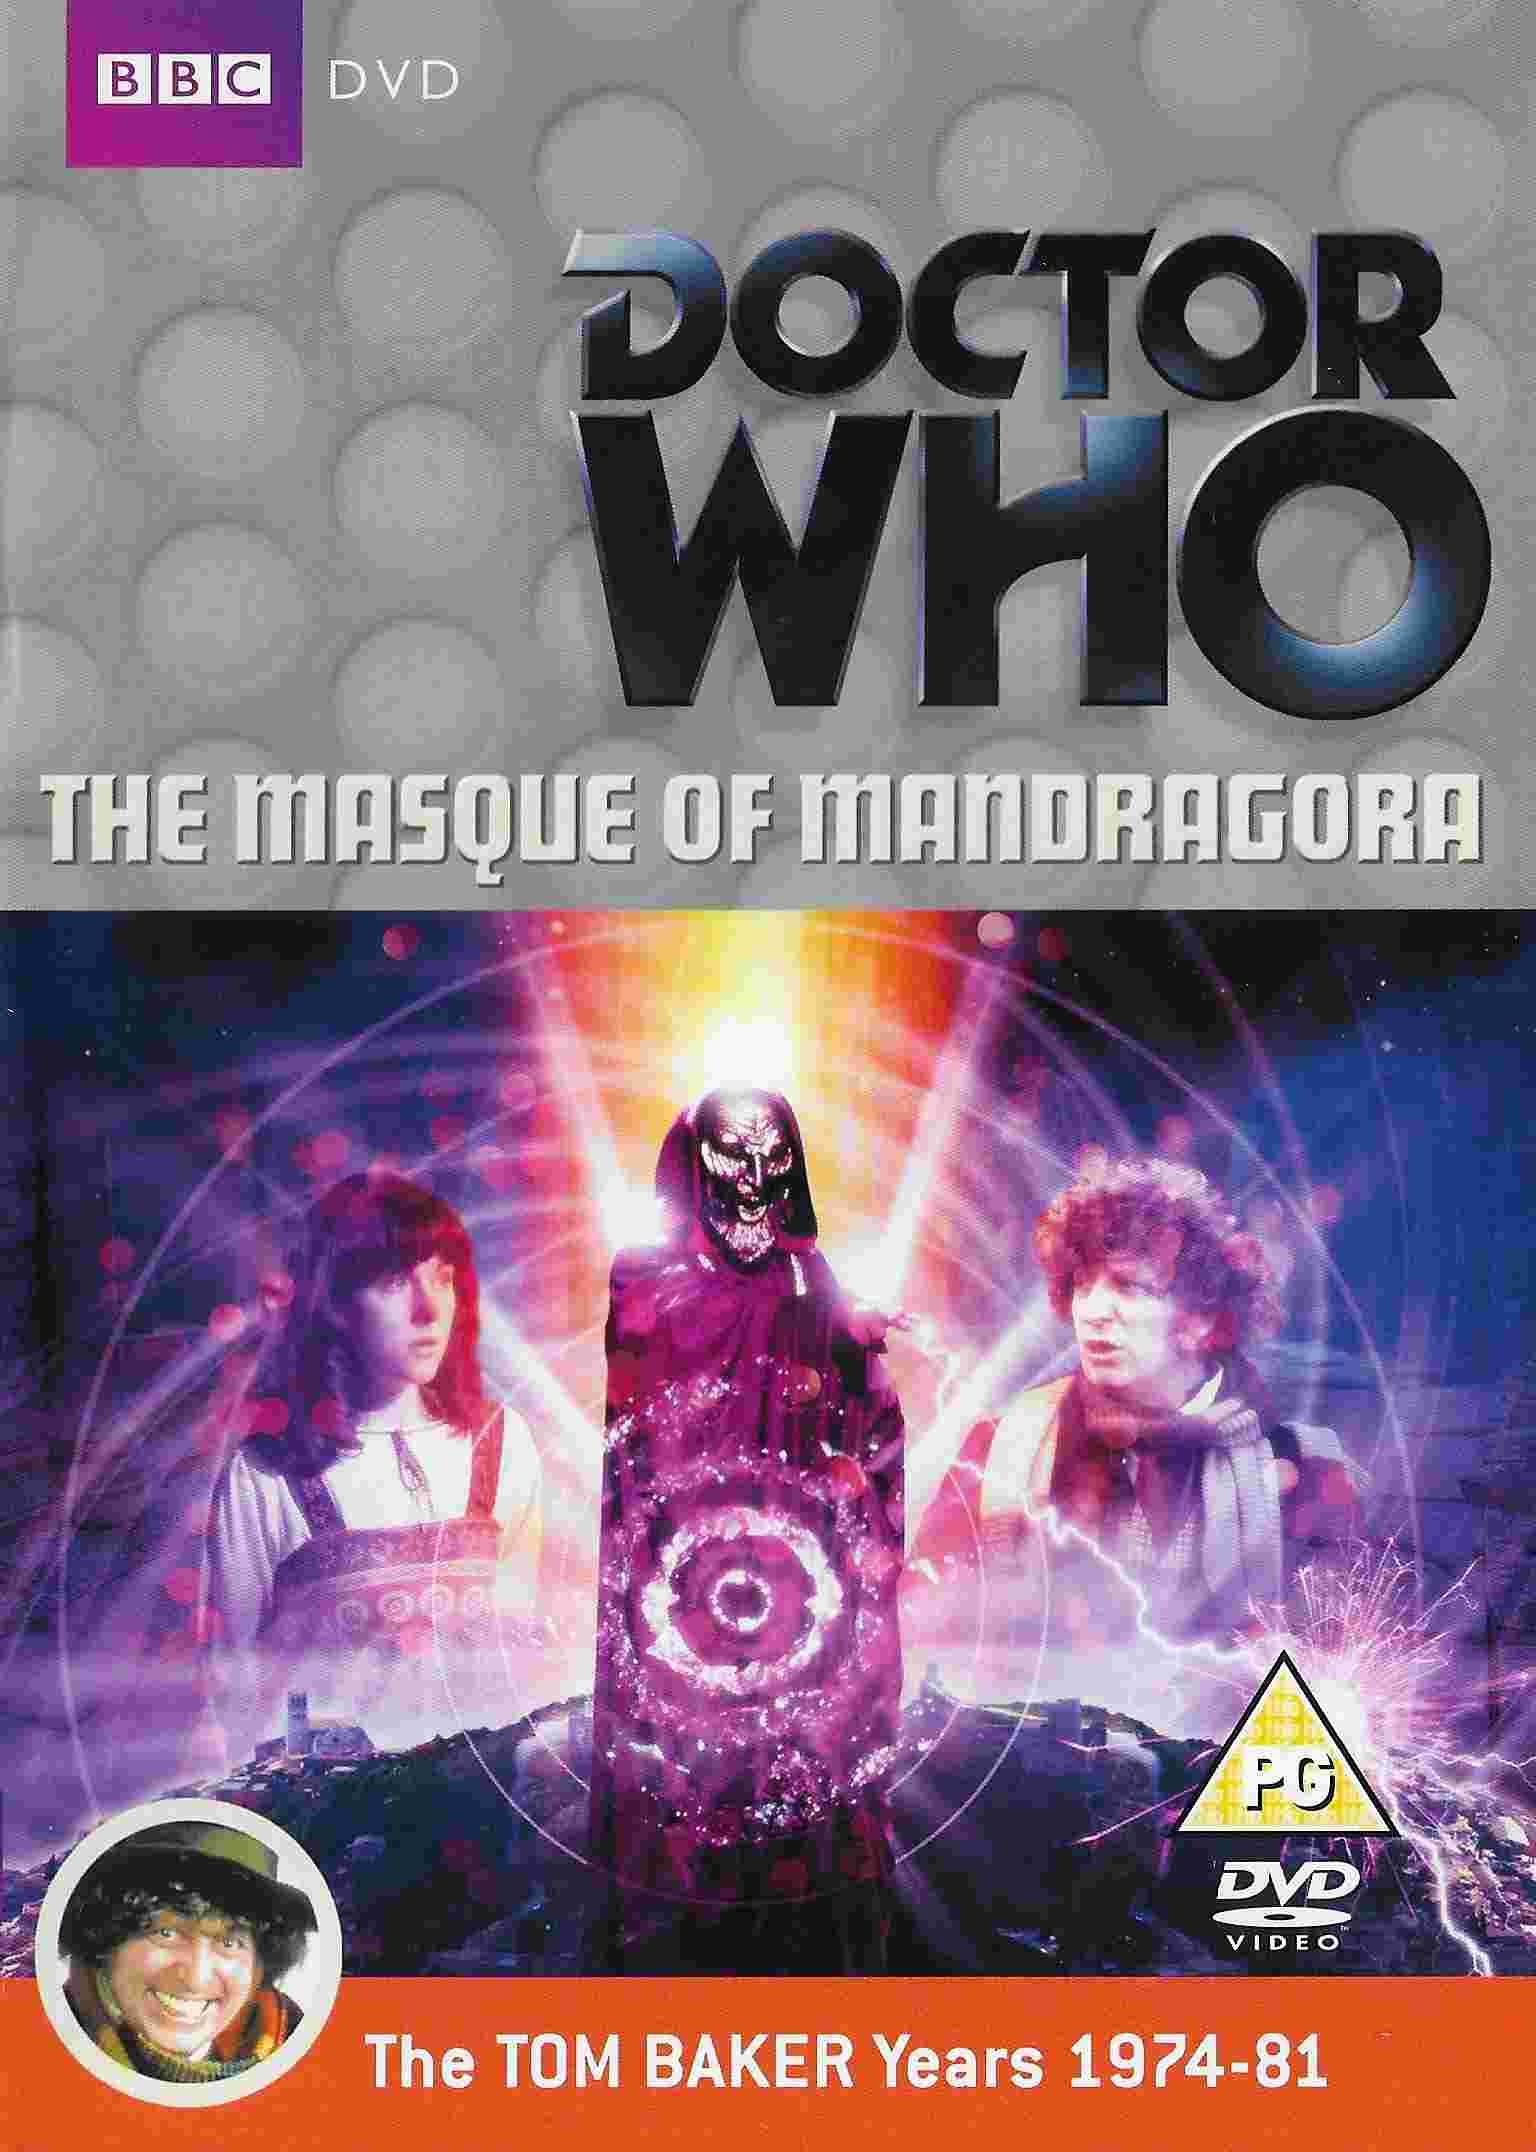 Picture of BBCDVD 2805 Doctor Who - The masque of Mandragona by artist Terry Nation from the BBC records and Tapes library